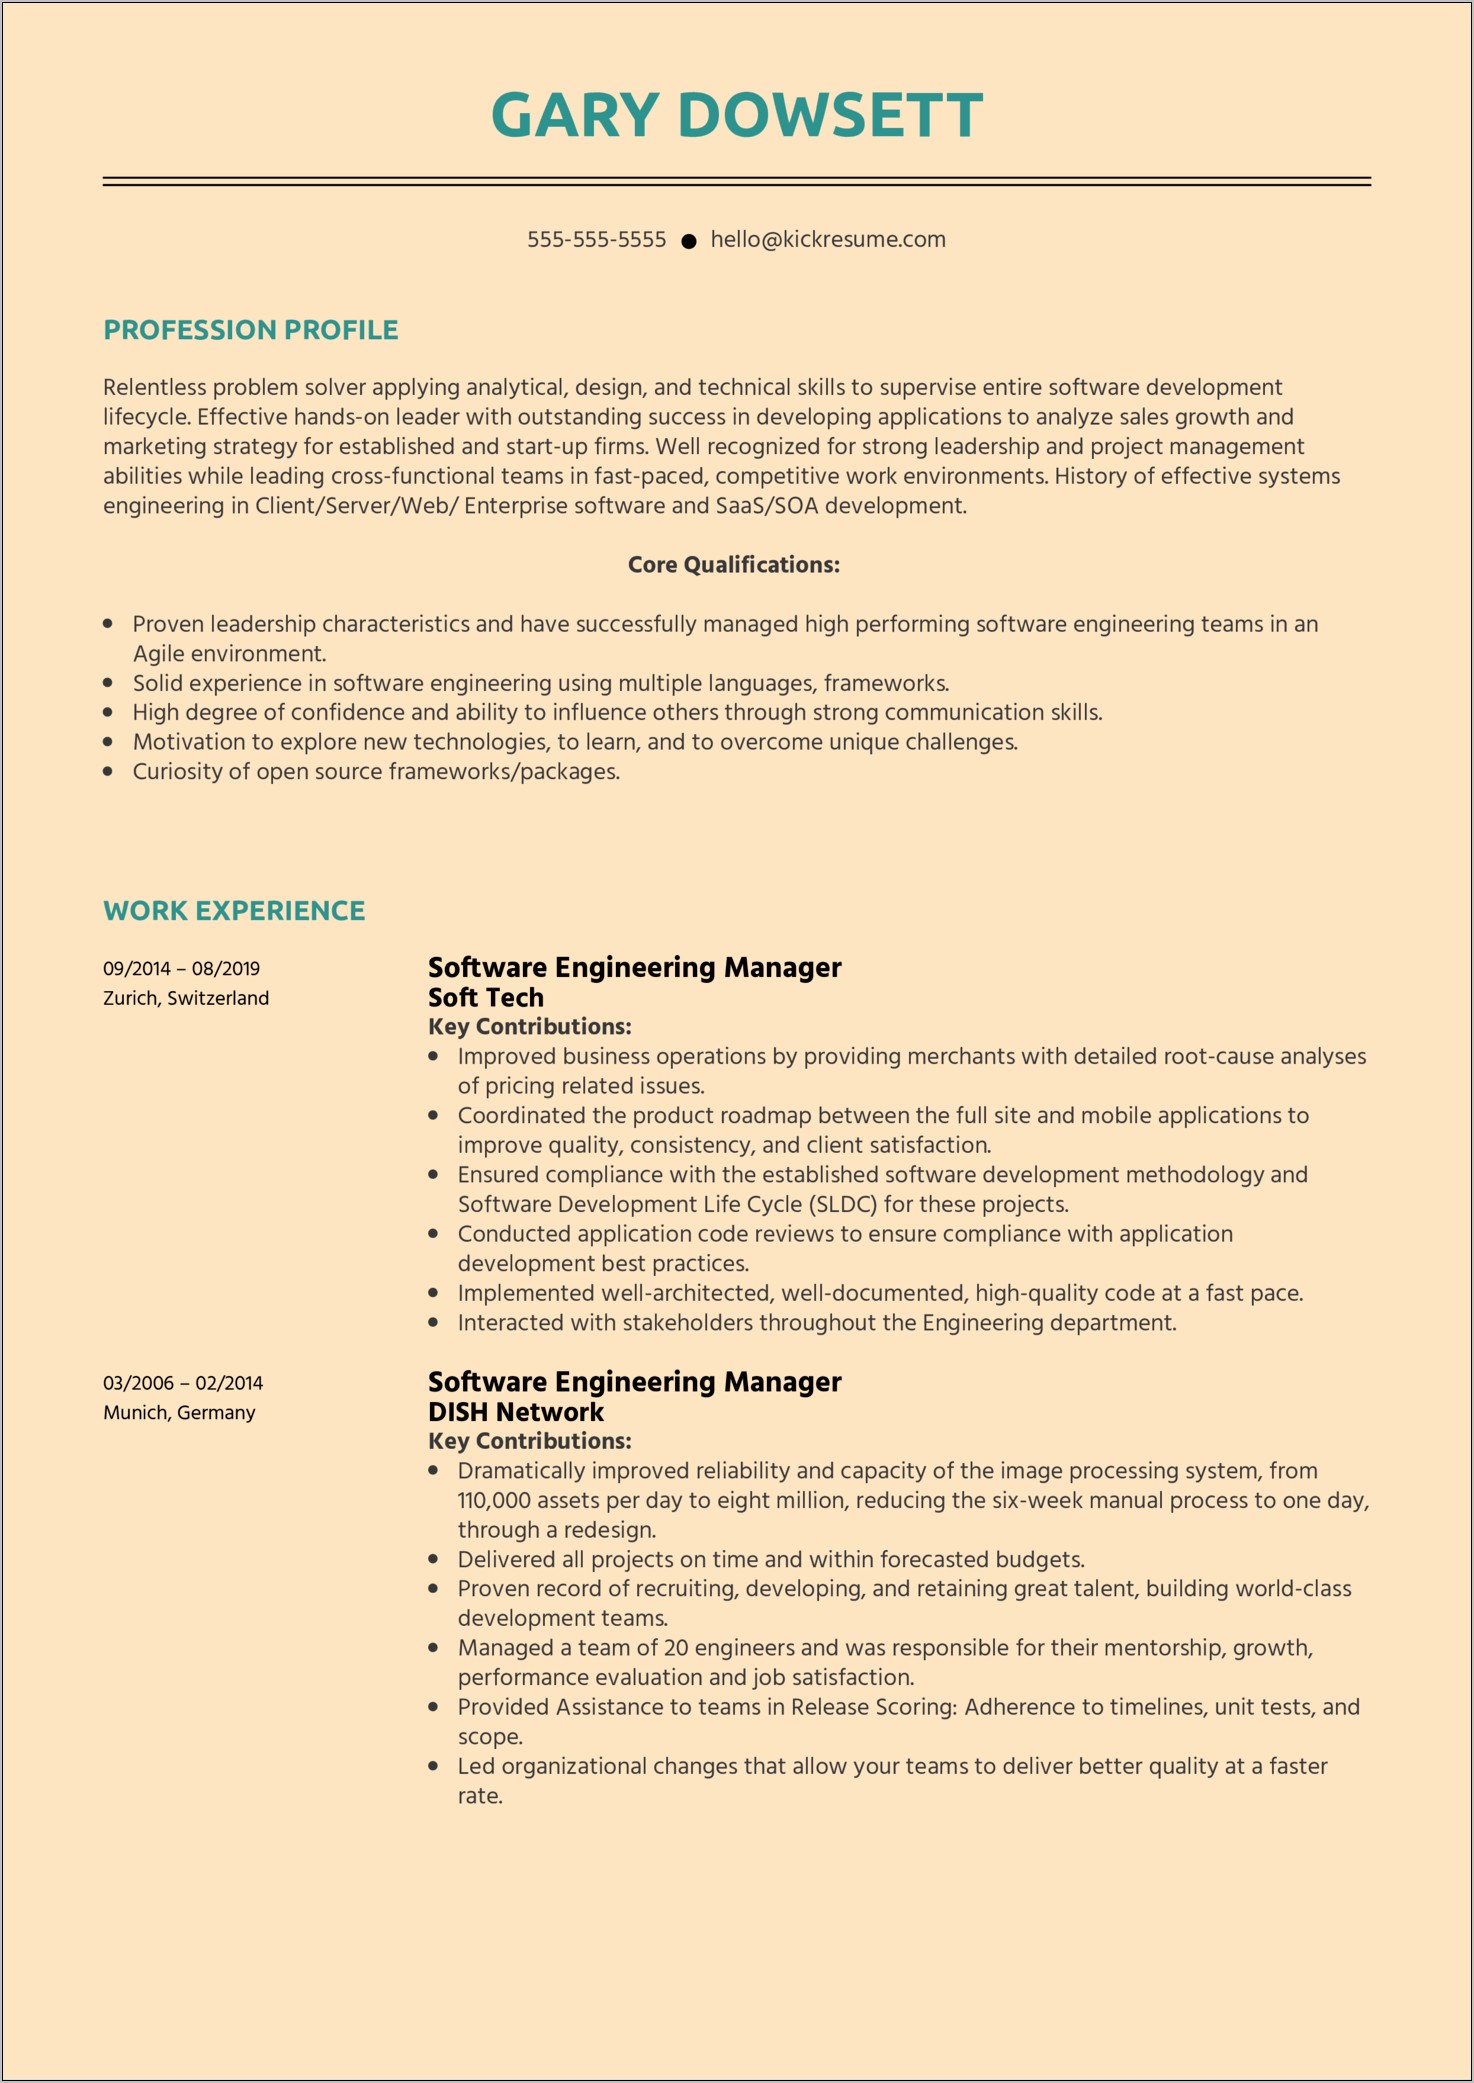 Resume Objective For It Manager